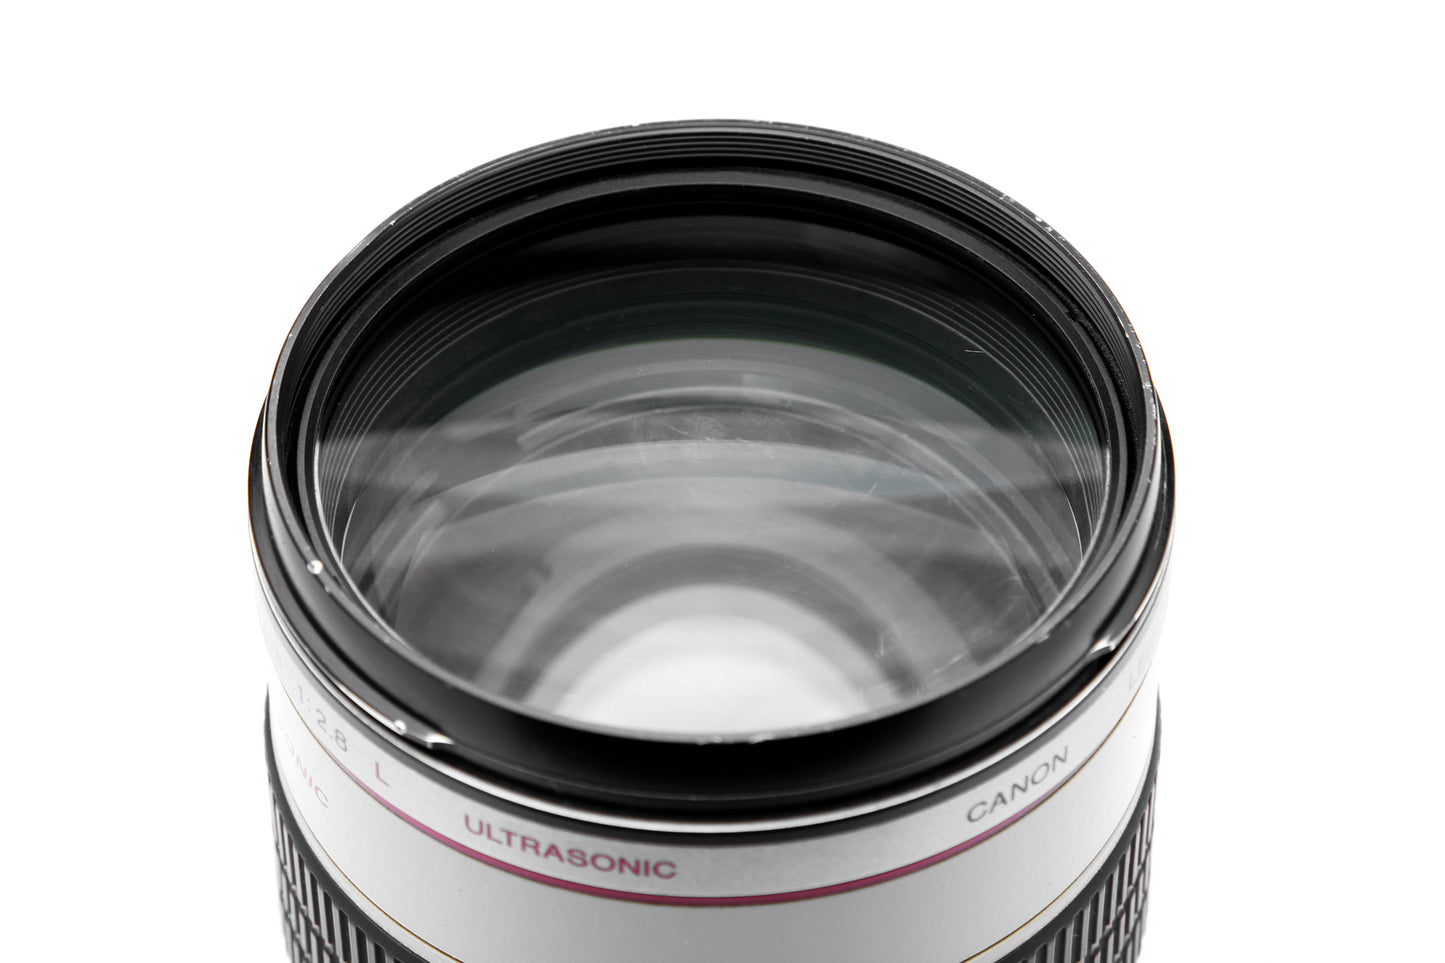 USED Canon 70-200 f2.8 IS USM Lens